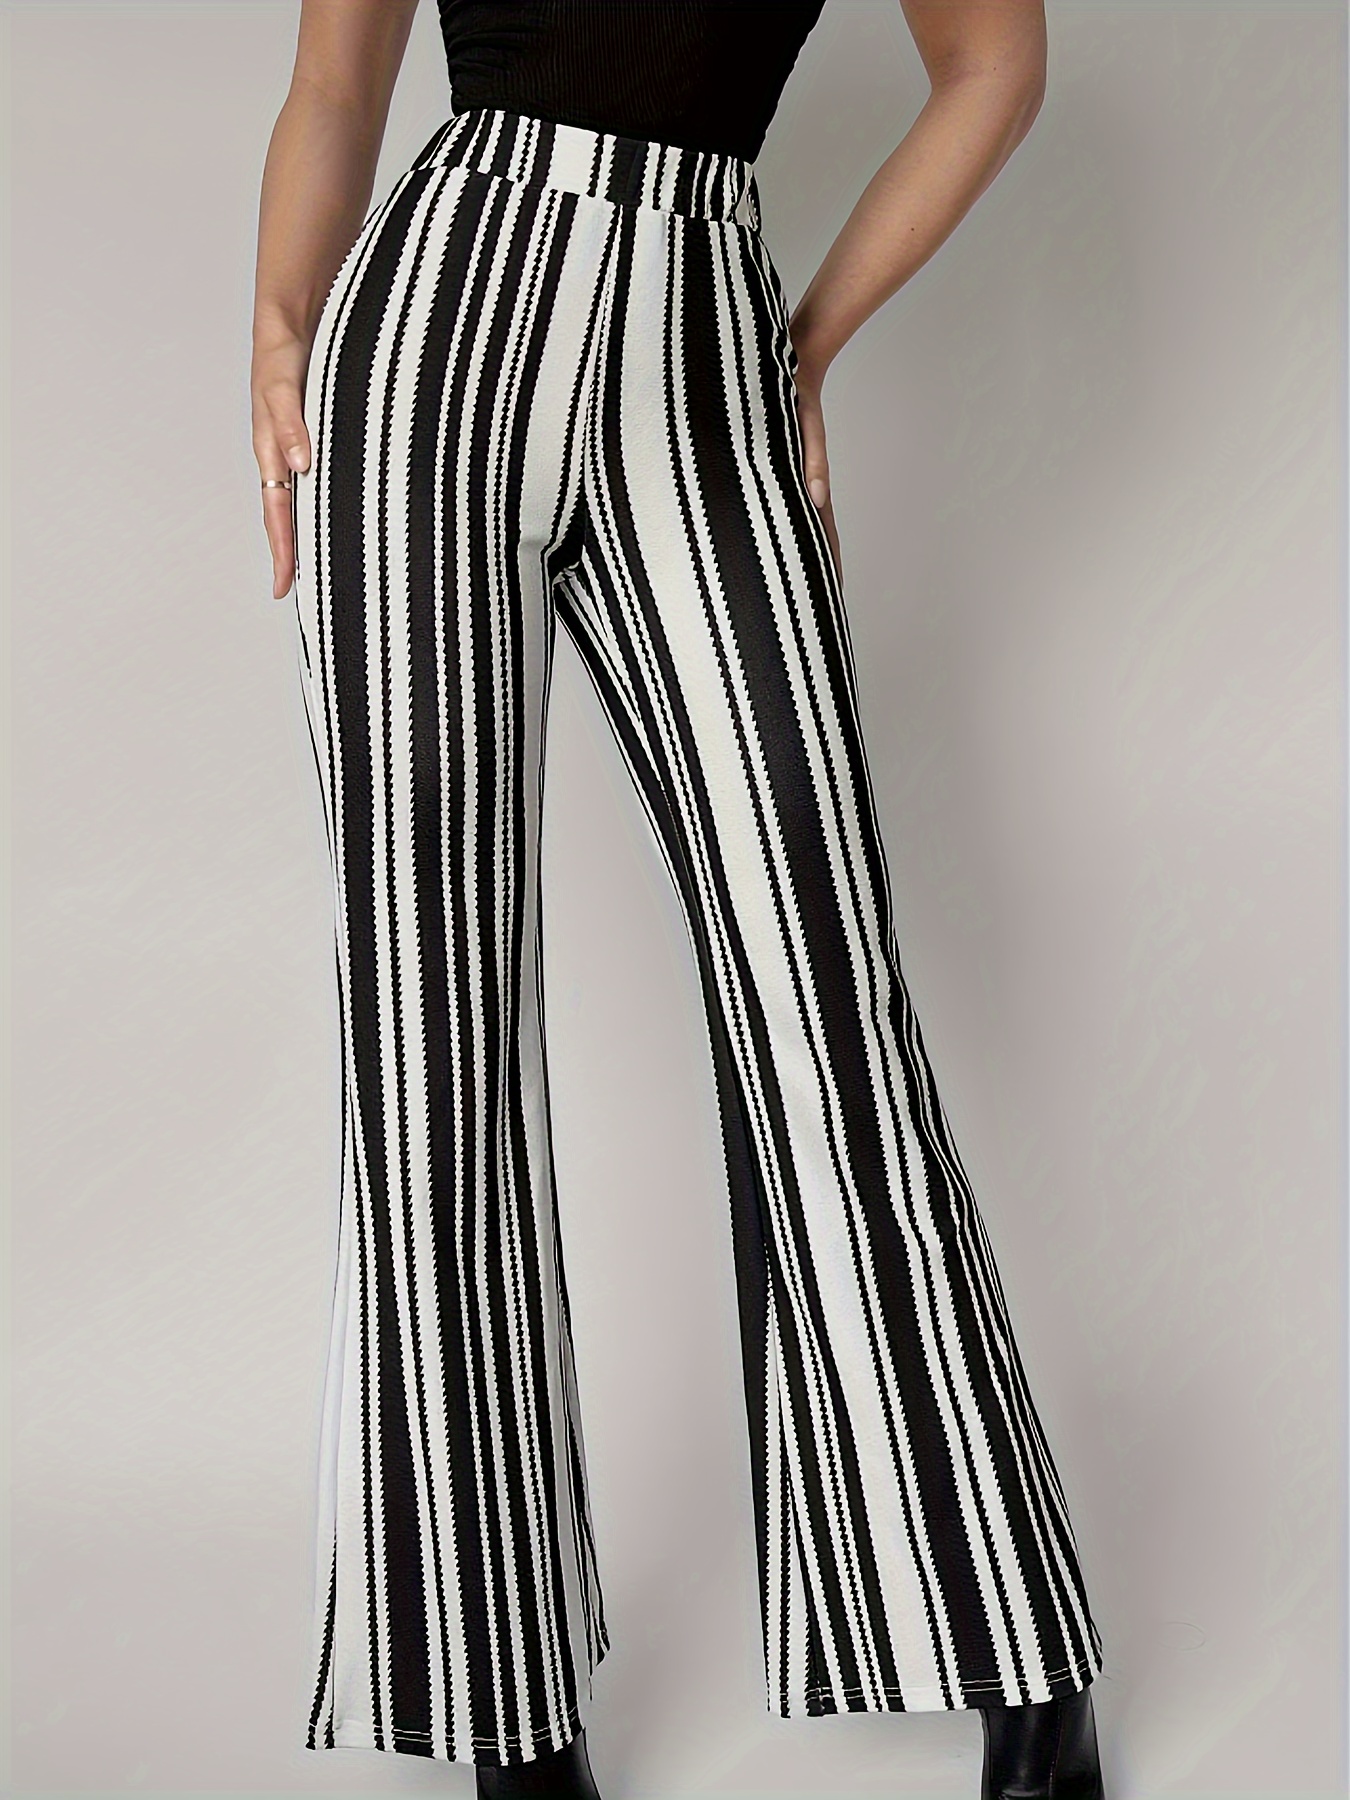 Black And White Striped Knitted Stacked Pants Woman Fashion High